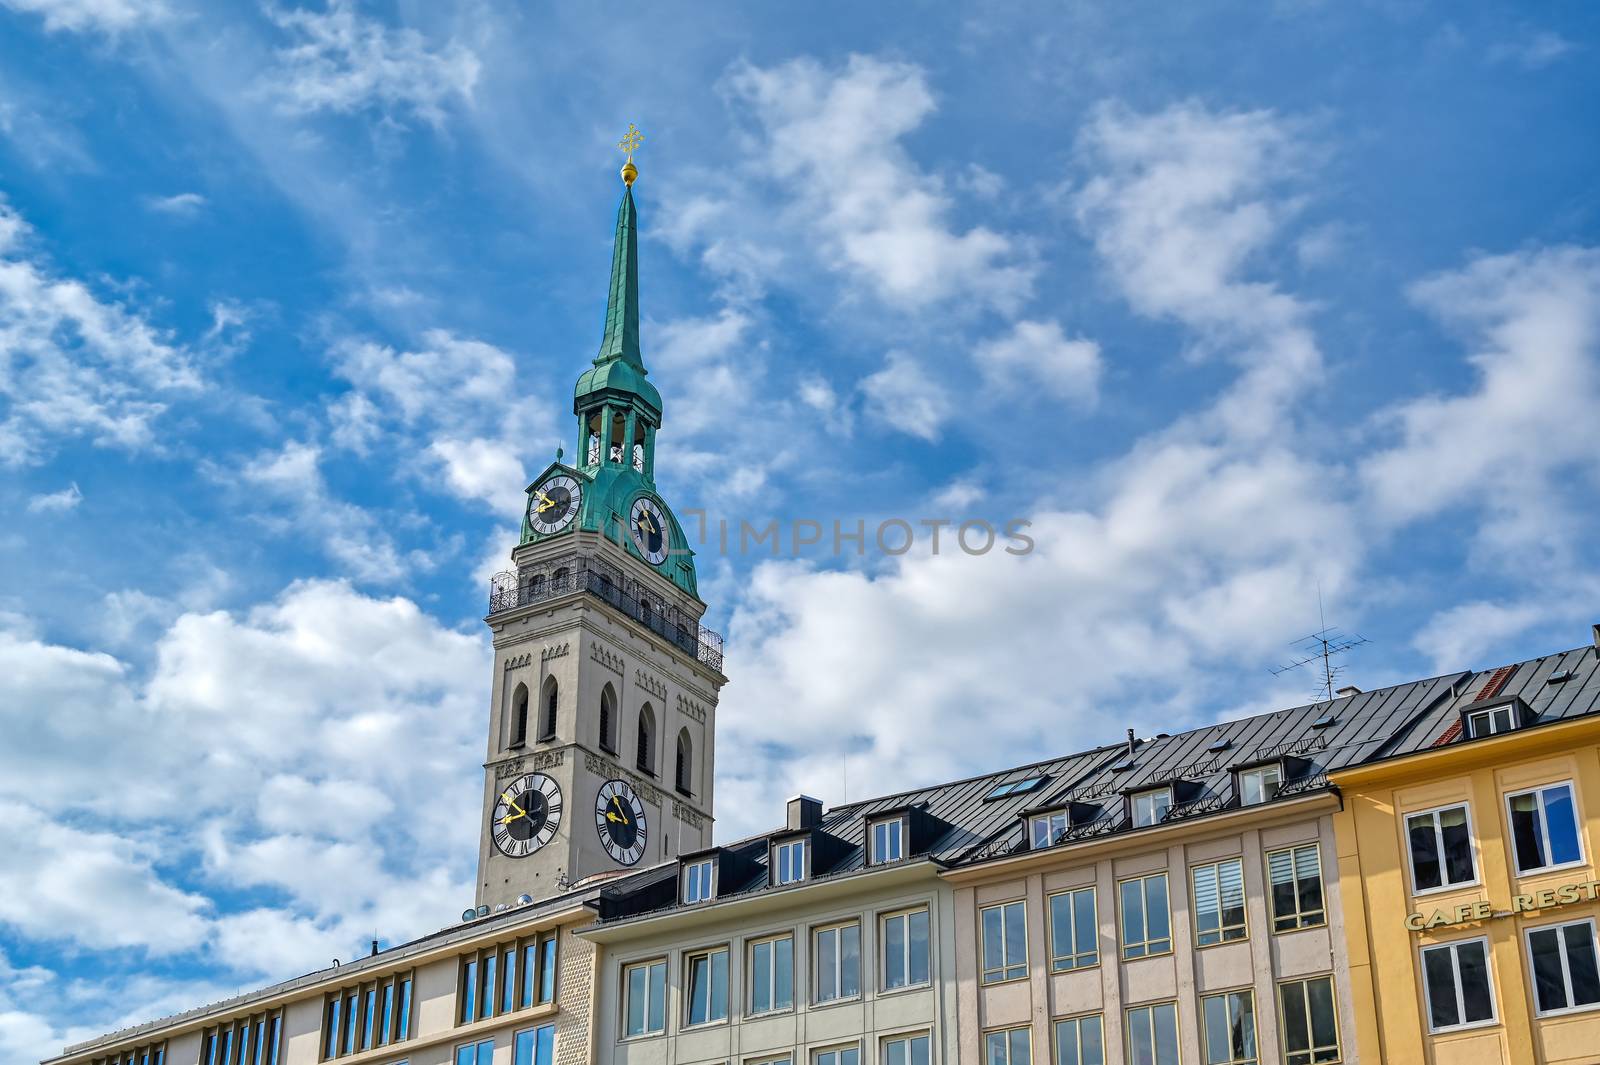 The Church of St. Peter located in the Marienplatz in Munich, Germany.